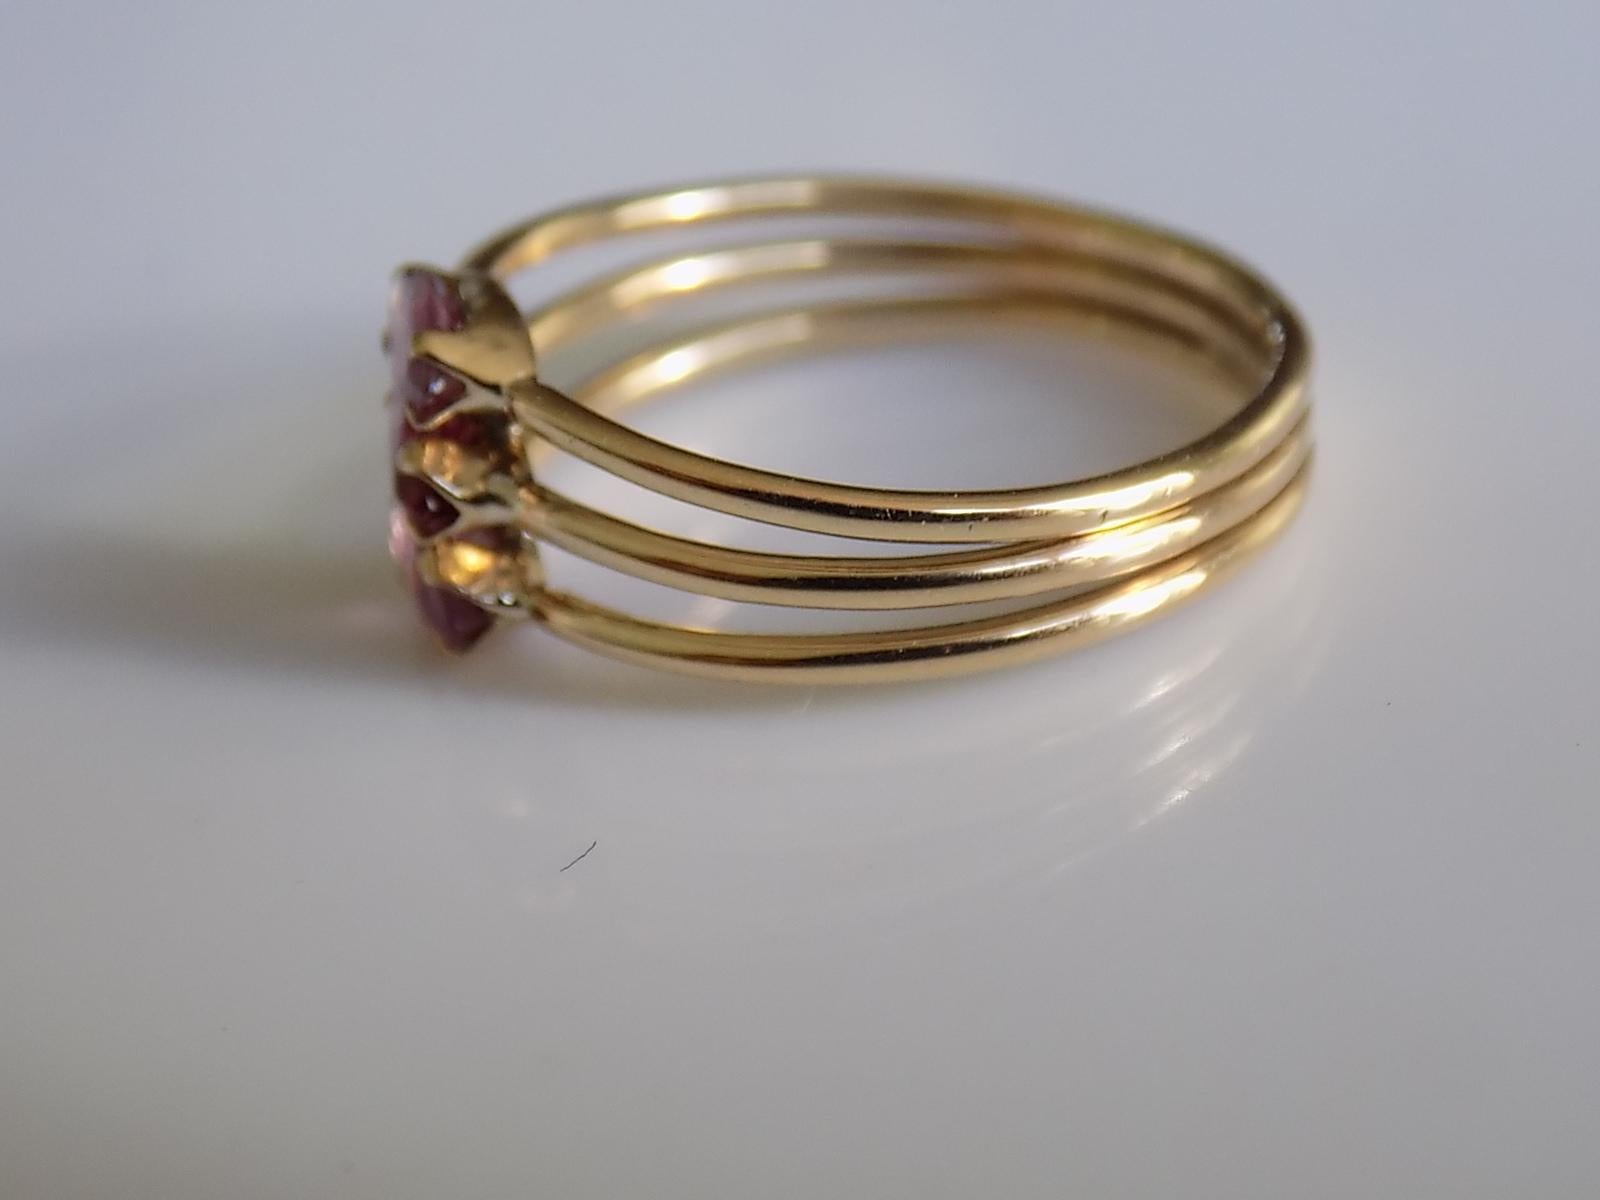 A Lovely Vintage 18 carat Gold and Marquise cut Garnet Harem style ring. Designed as three bands jointed together. 
Size L UK, 6 US.
Height of the face 8mm.
Weight 2.0gr.
Marked 18K for 18 Carat Gold.
Very good condition and ready to wear.